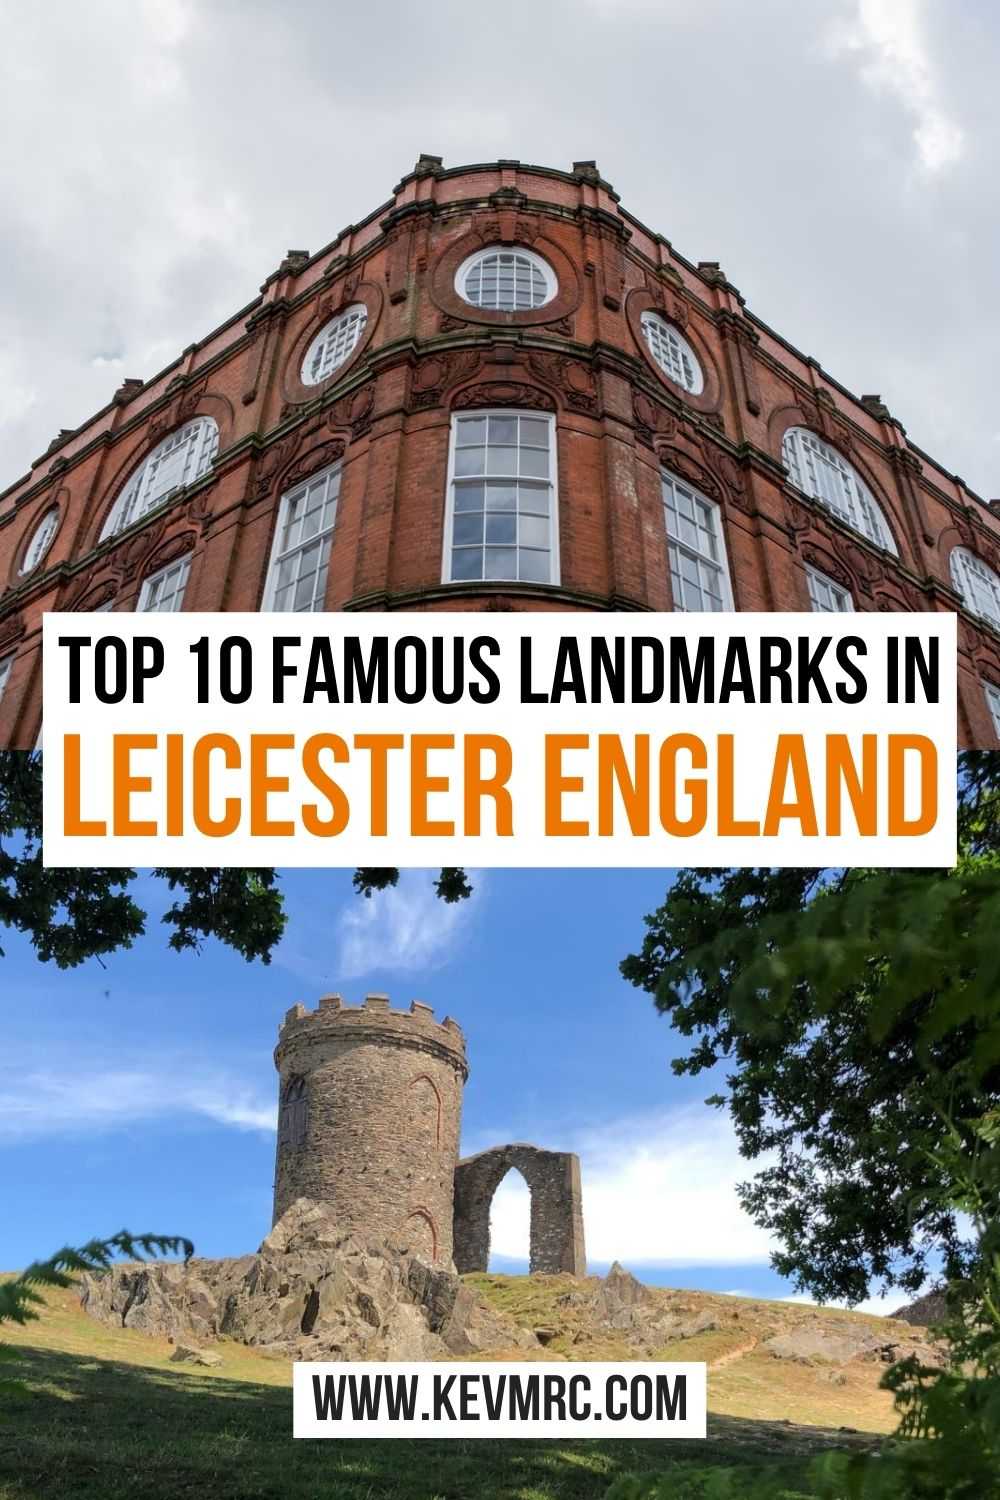 10 famous landmarks in Leicester England. Discover the best places to see in Leicester! england travel | travel england #england